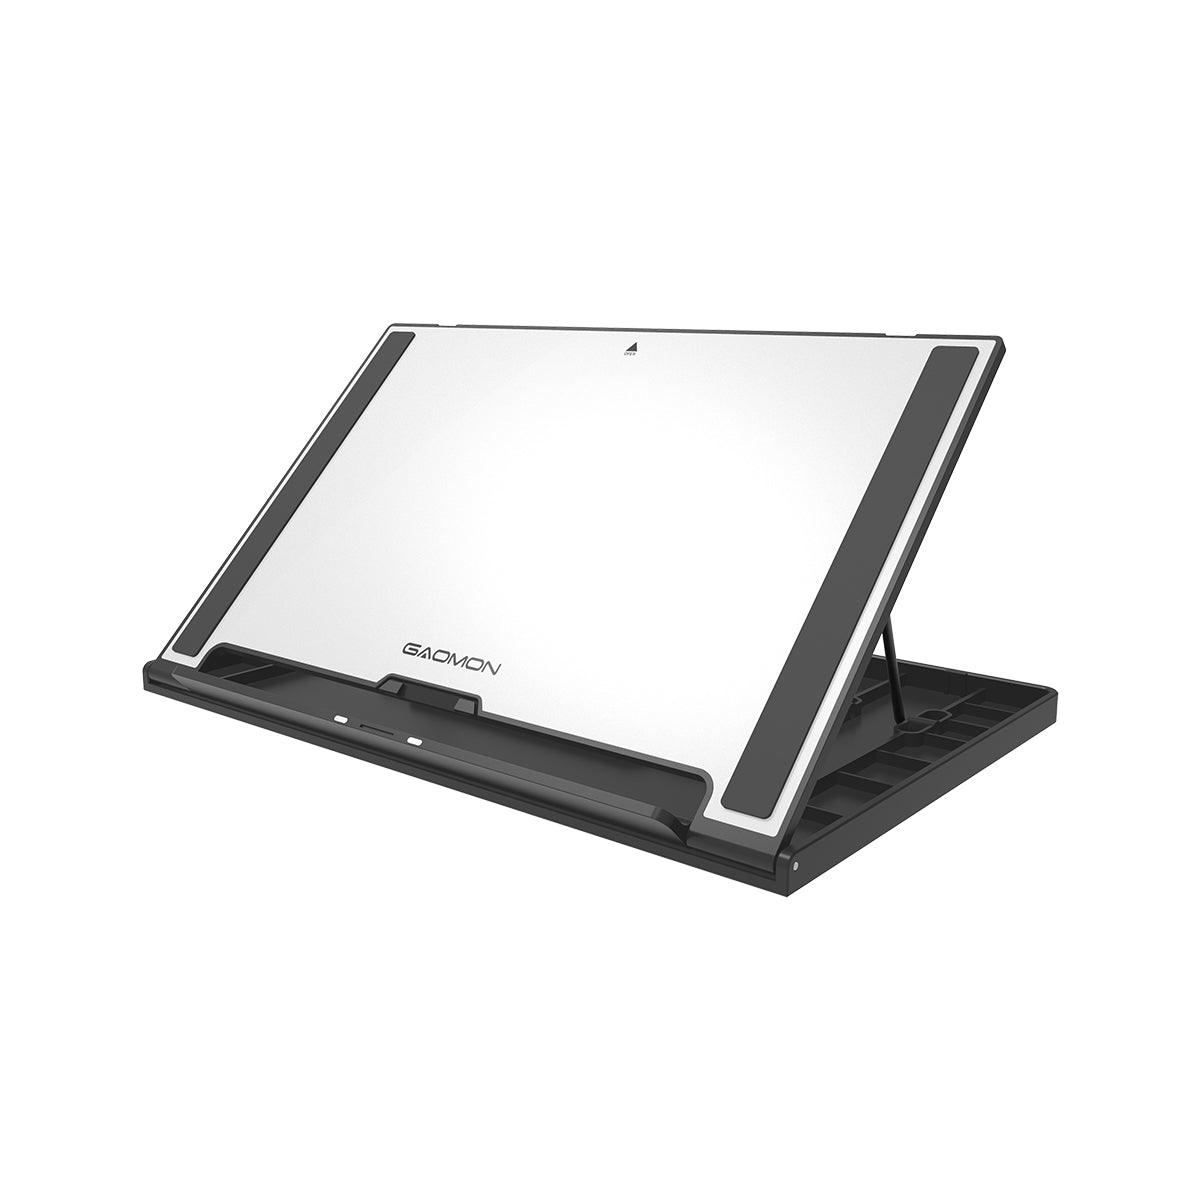 GAOMON Adjustable Tablet Stand GMS01 for Drawing Tablets and Displays